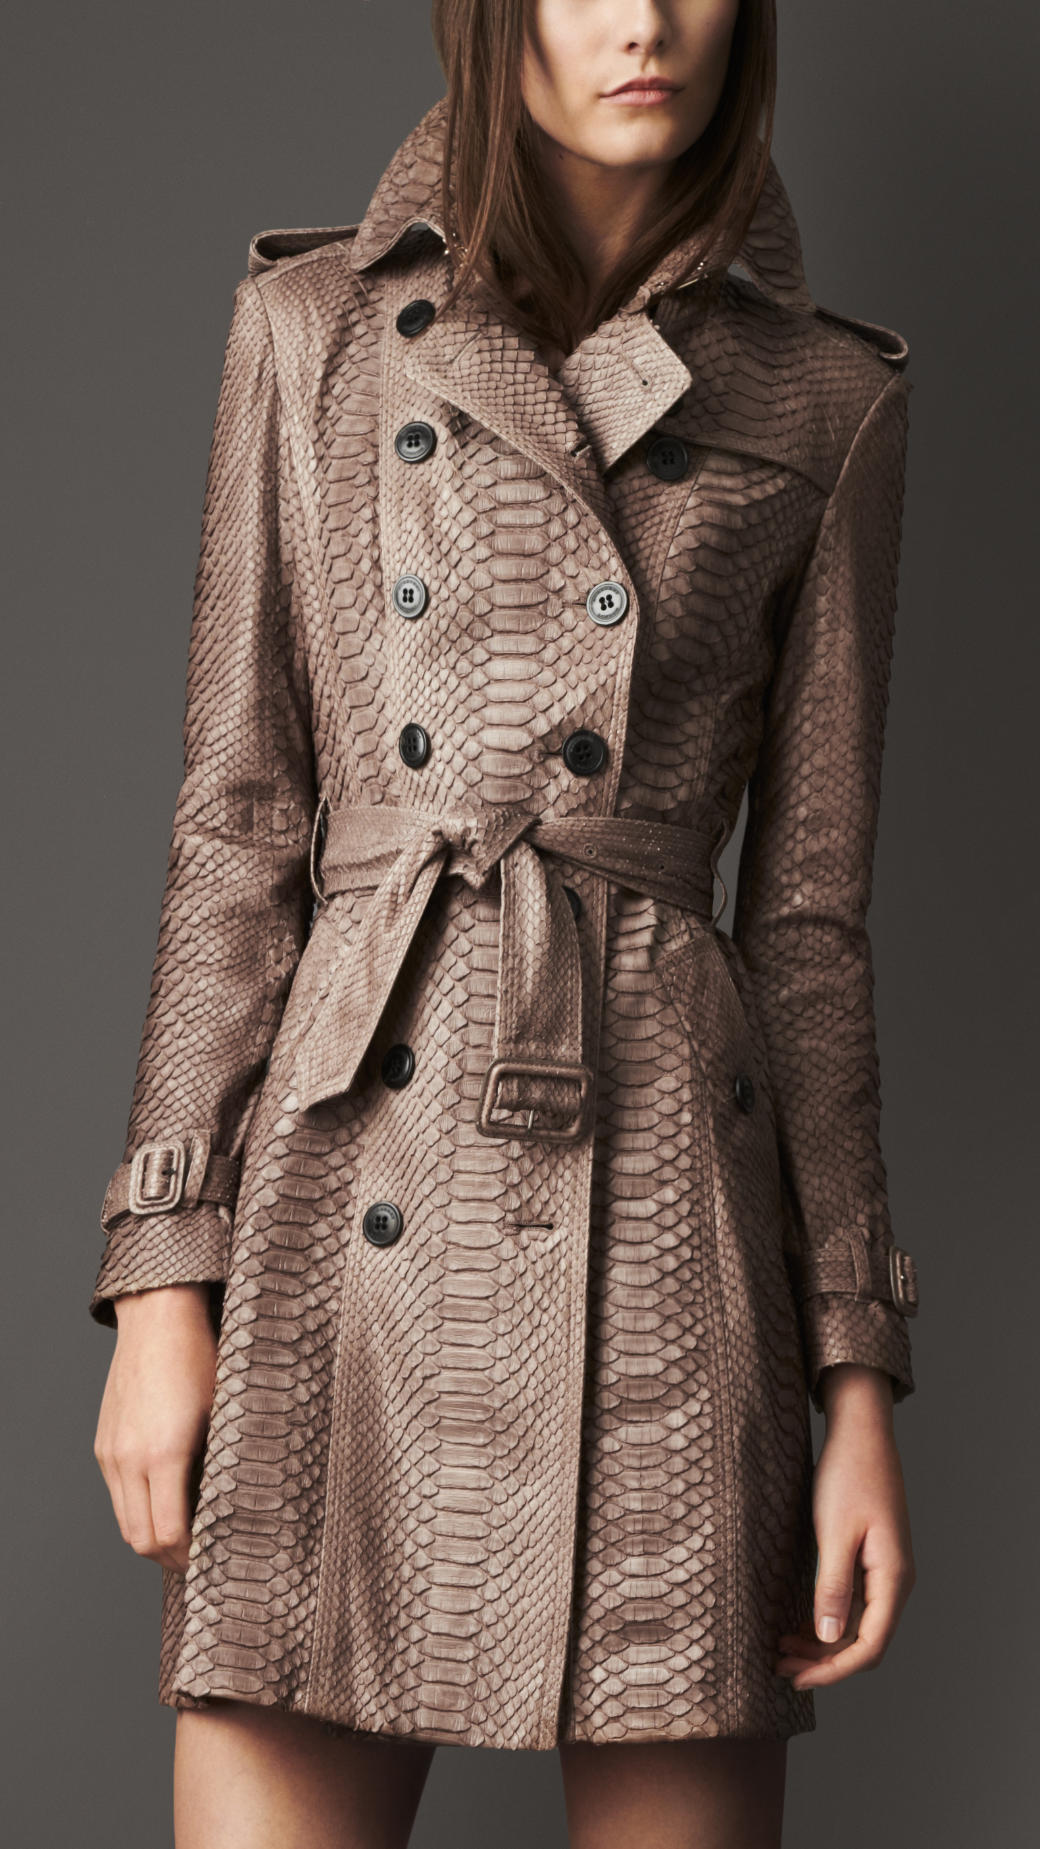 burberry-pale-fawn-long-python-leather-trench-coat-product-1-6892382-518928030.jpeg